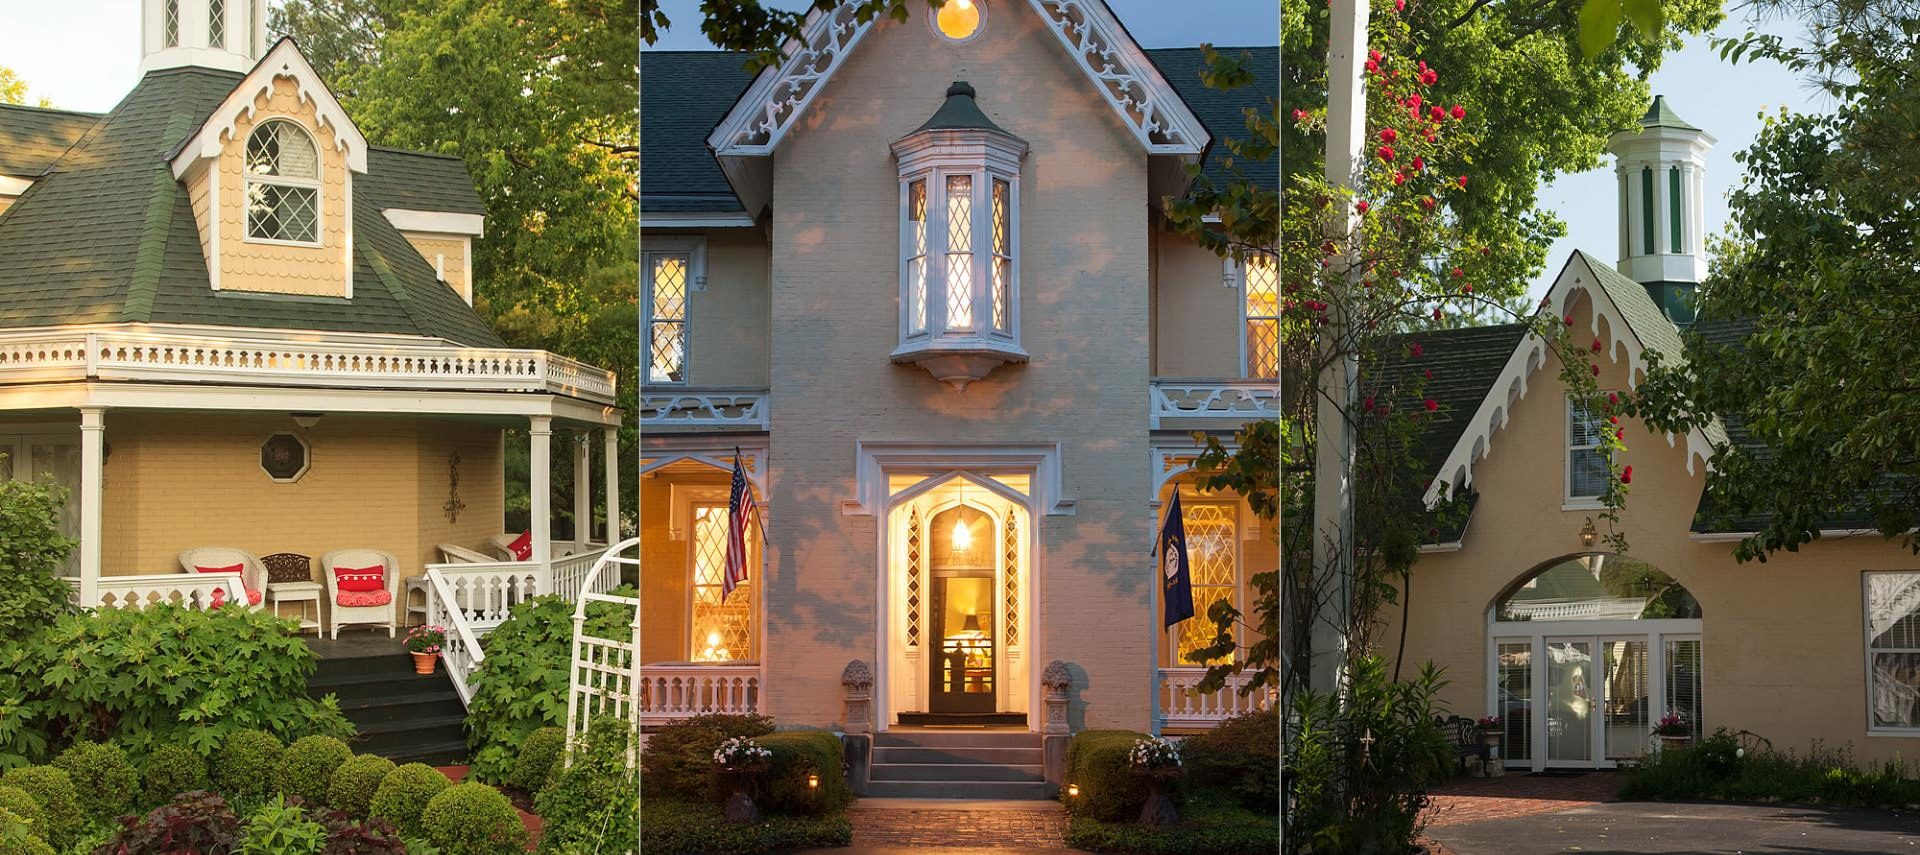 Three frames each showing the exterior view of the property painted cream with white trim